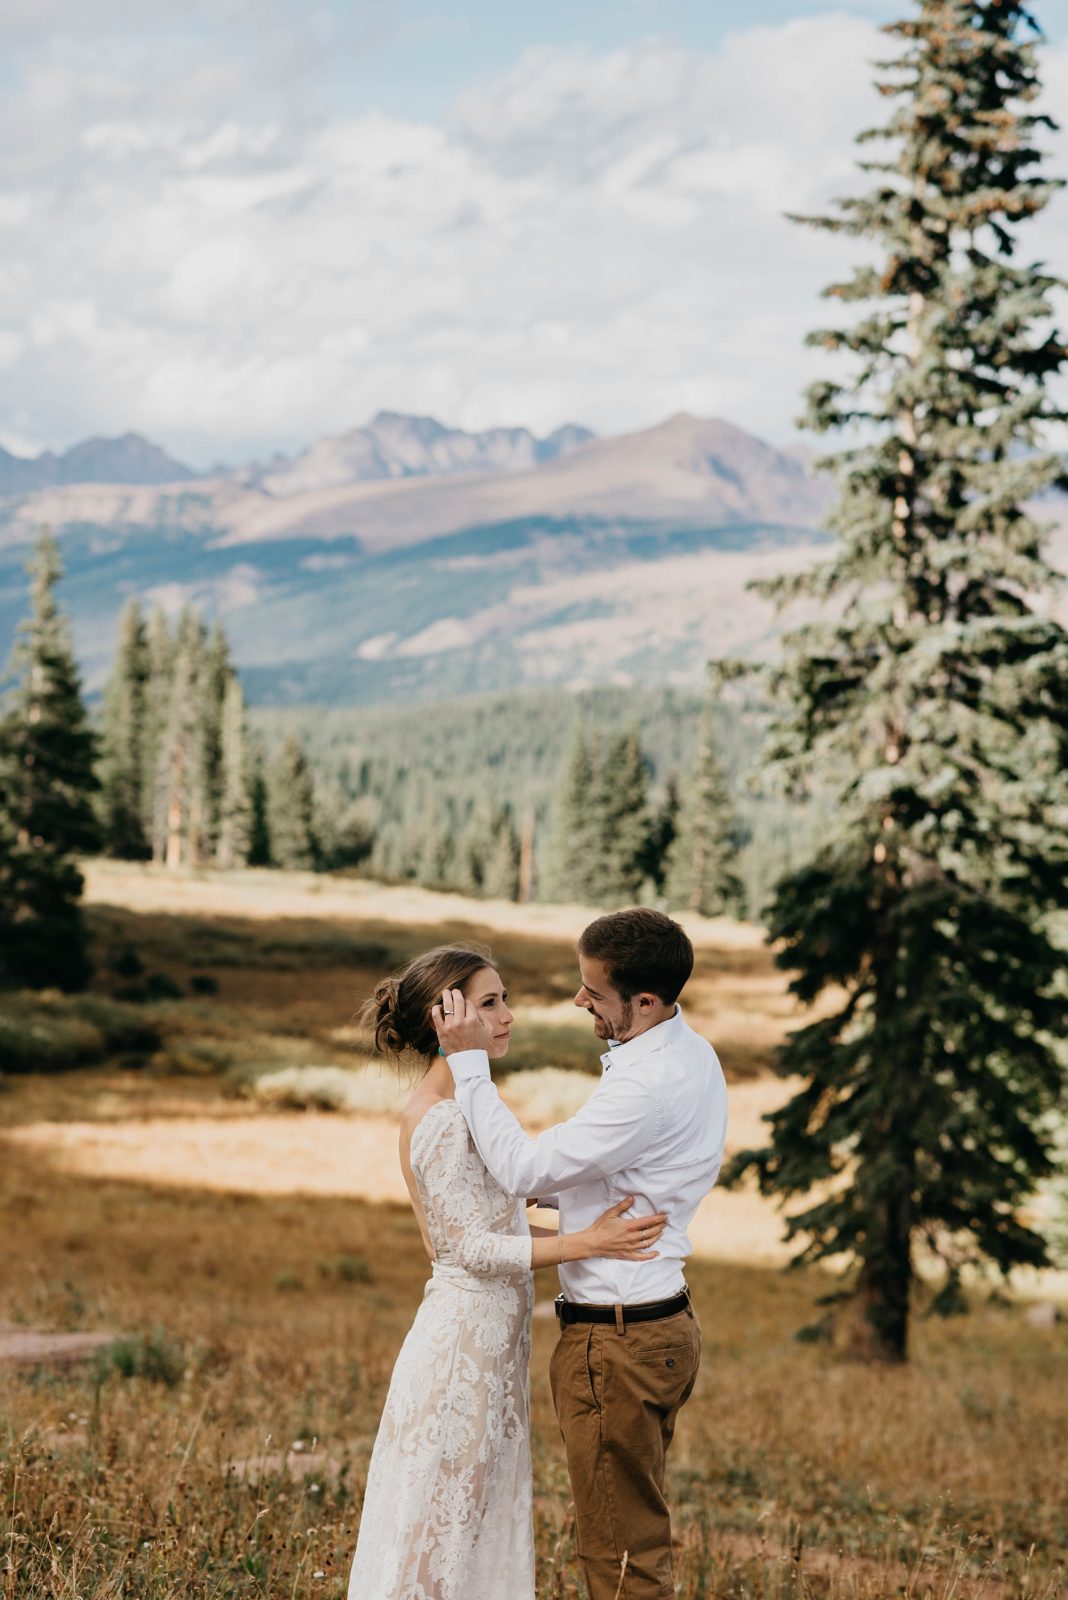 Day after wedding portraits for couple on the mountainside of Vail, Colorado